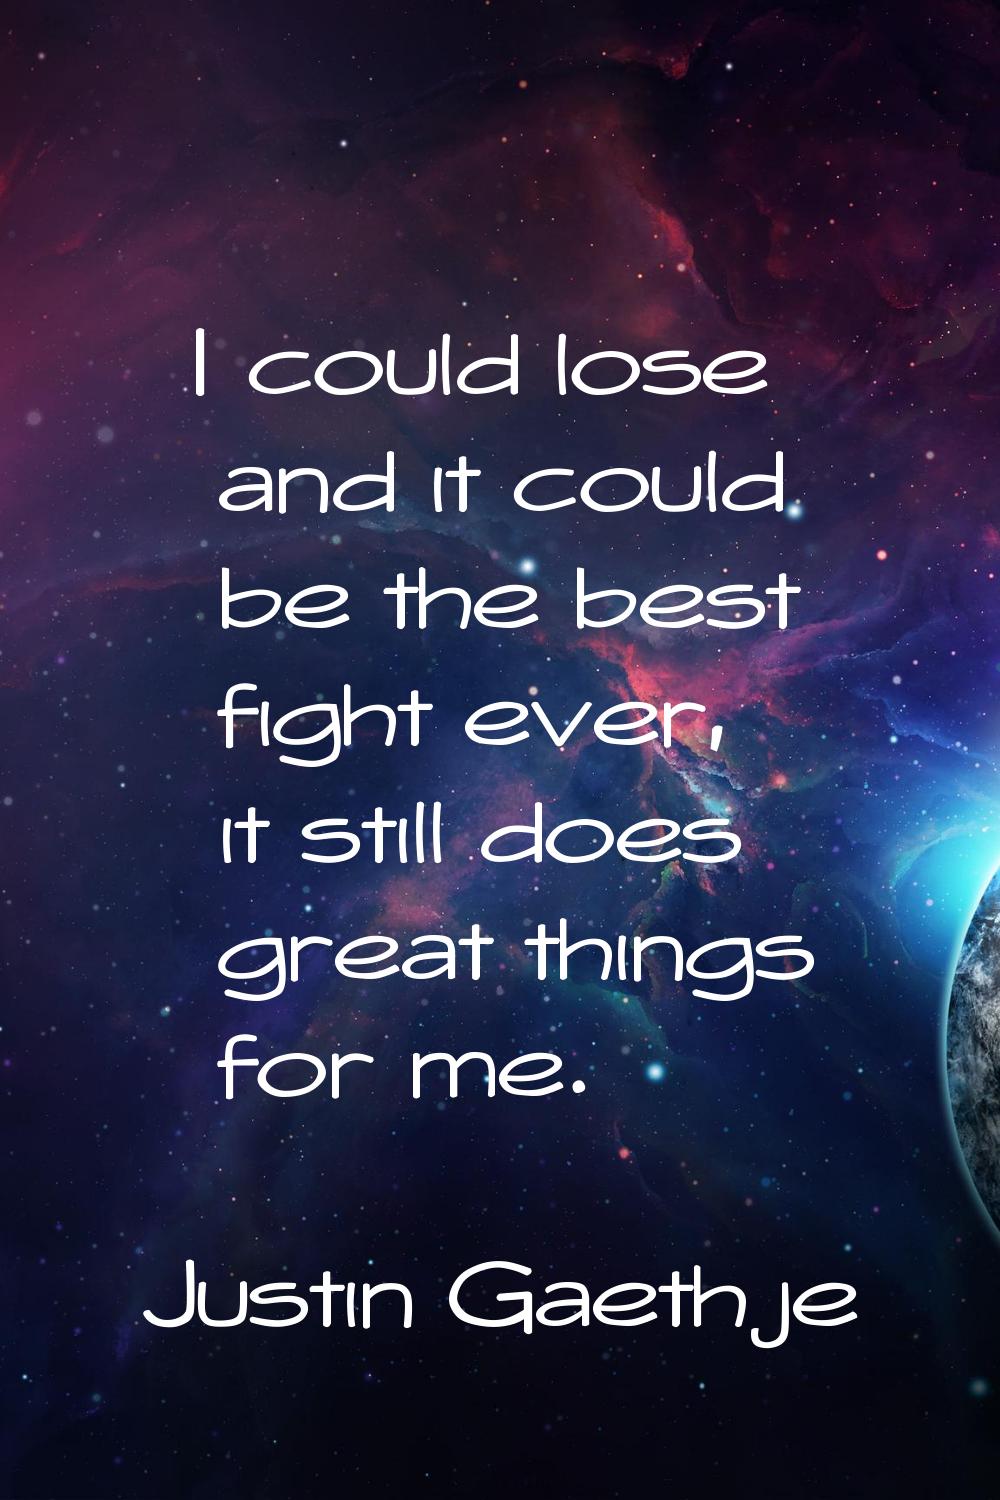 I could lose and it could be the best fight ever, it still does great things for me.